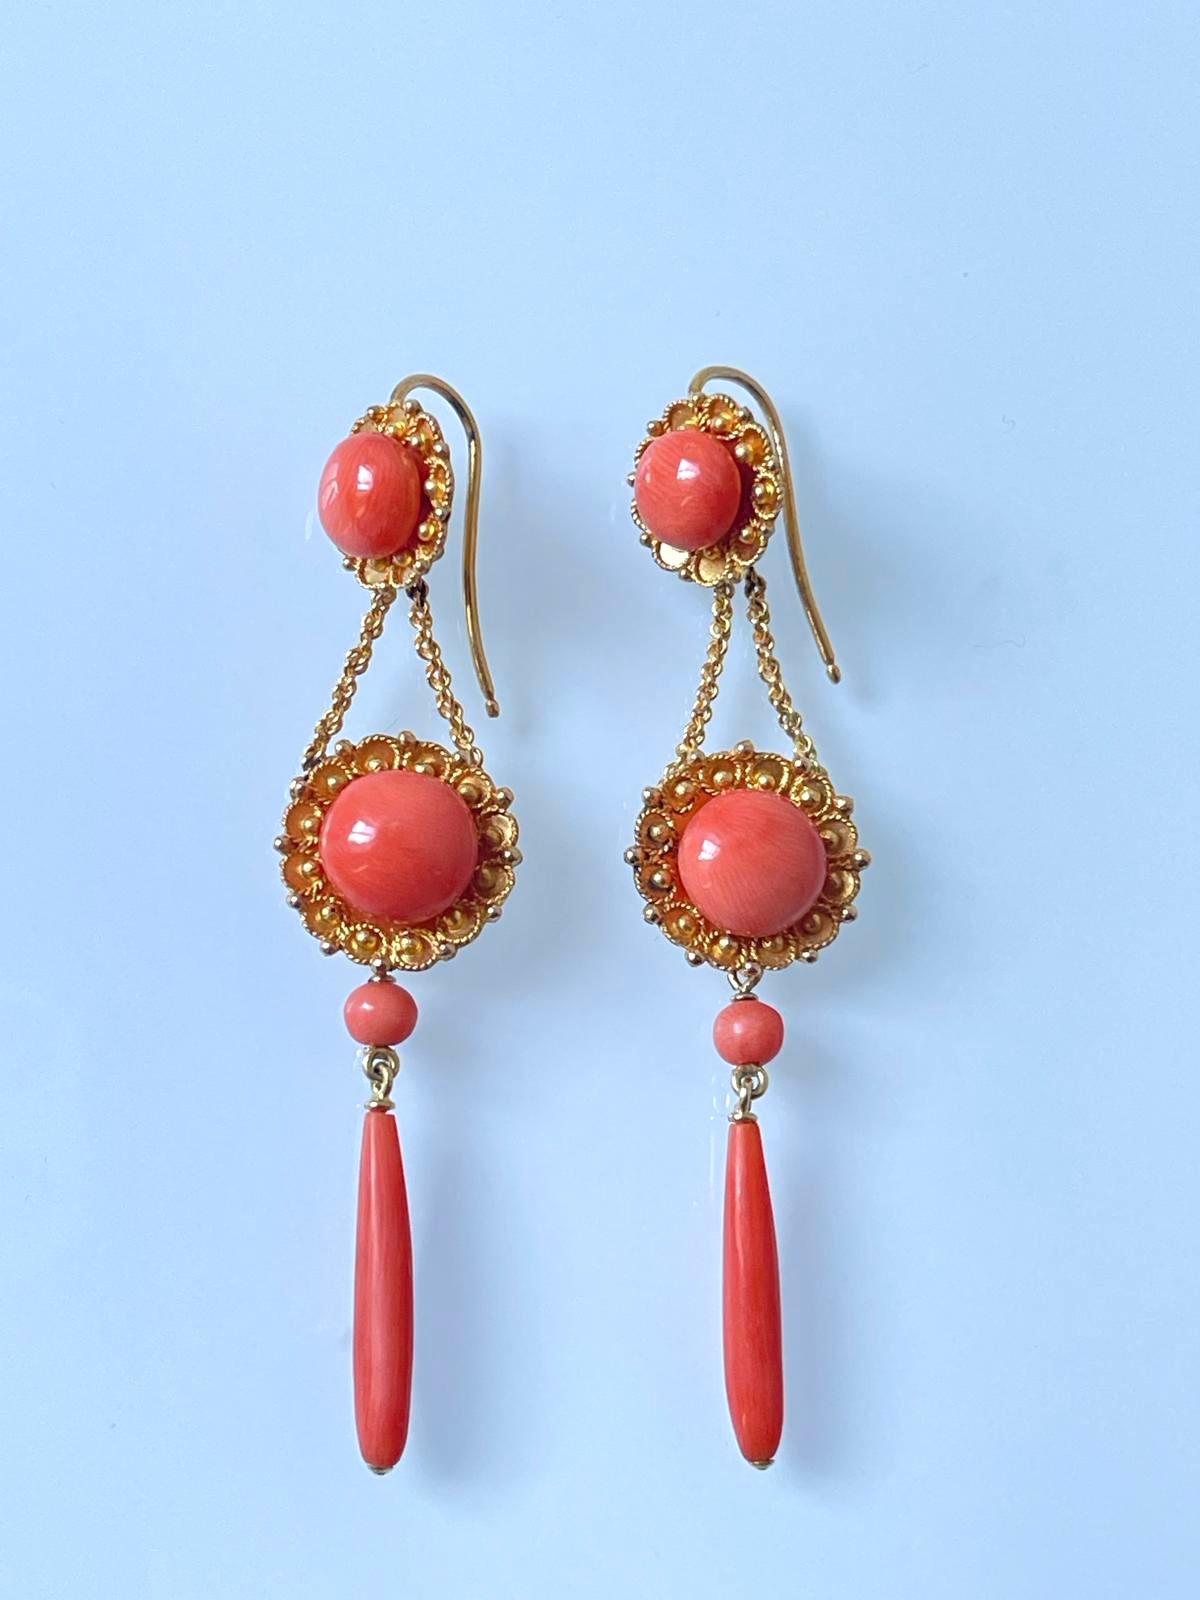 Antique Victorian 18K Gold Coral Etruscan Revival Long Drop Earrings C 1860 In Good Condition For Sale In Firenze, IT